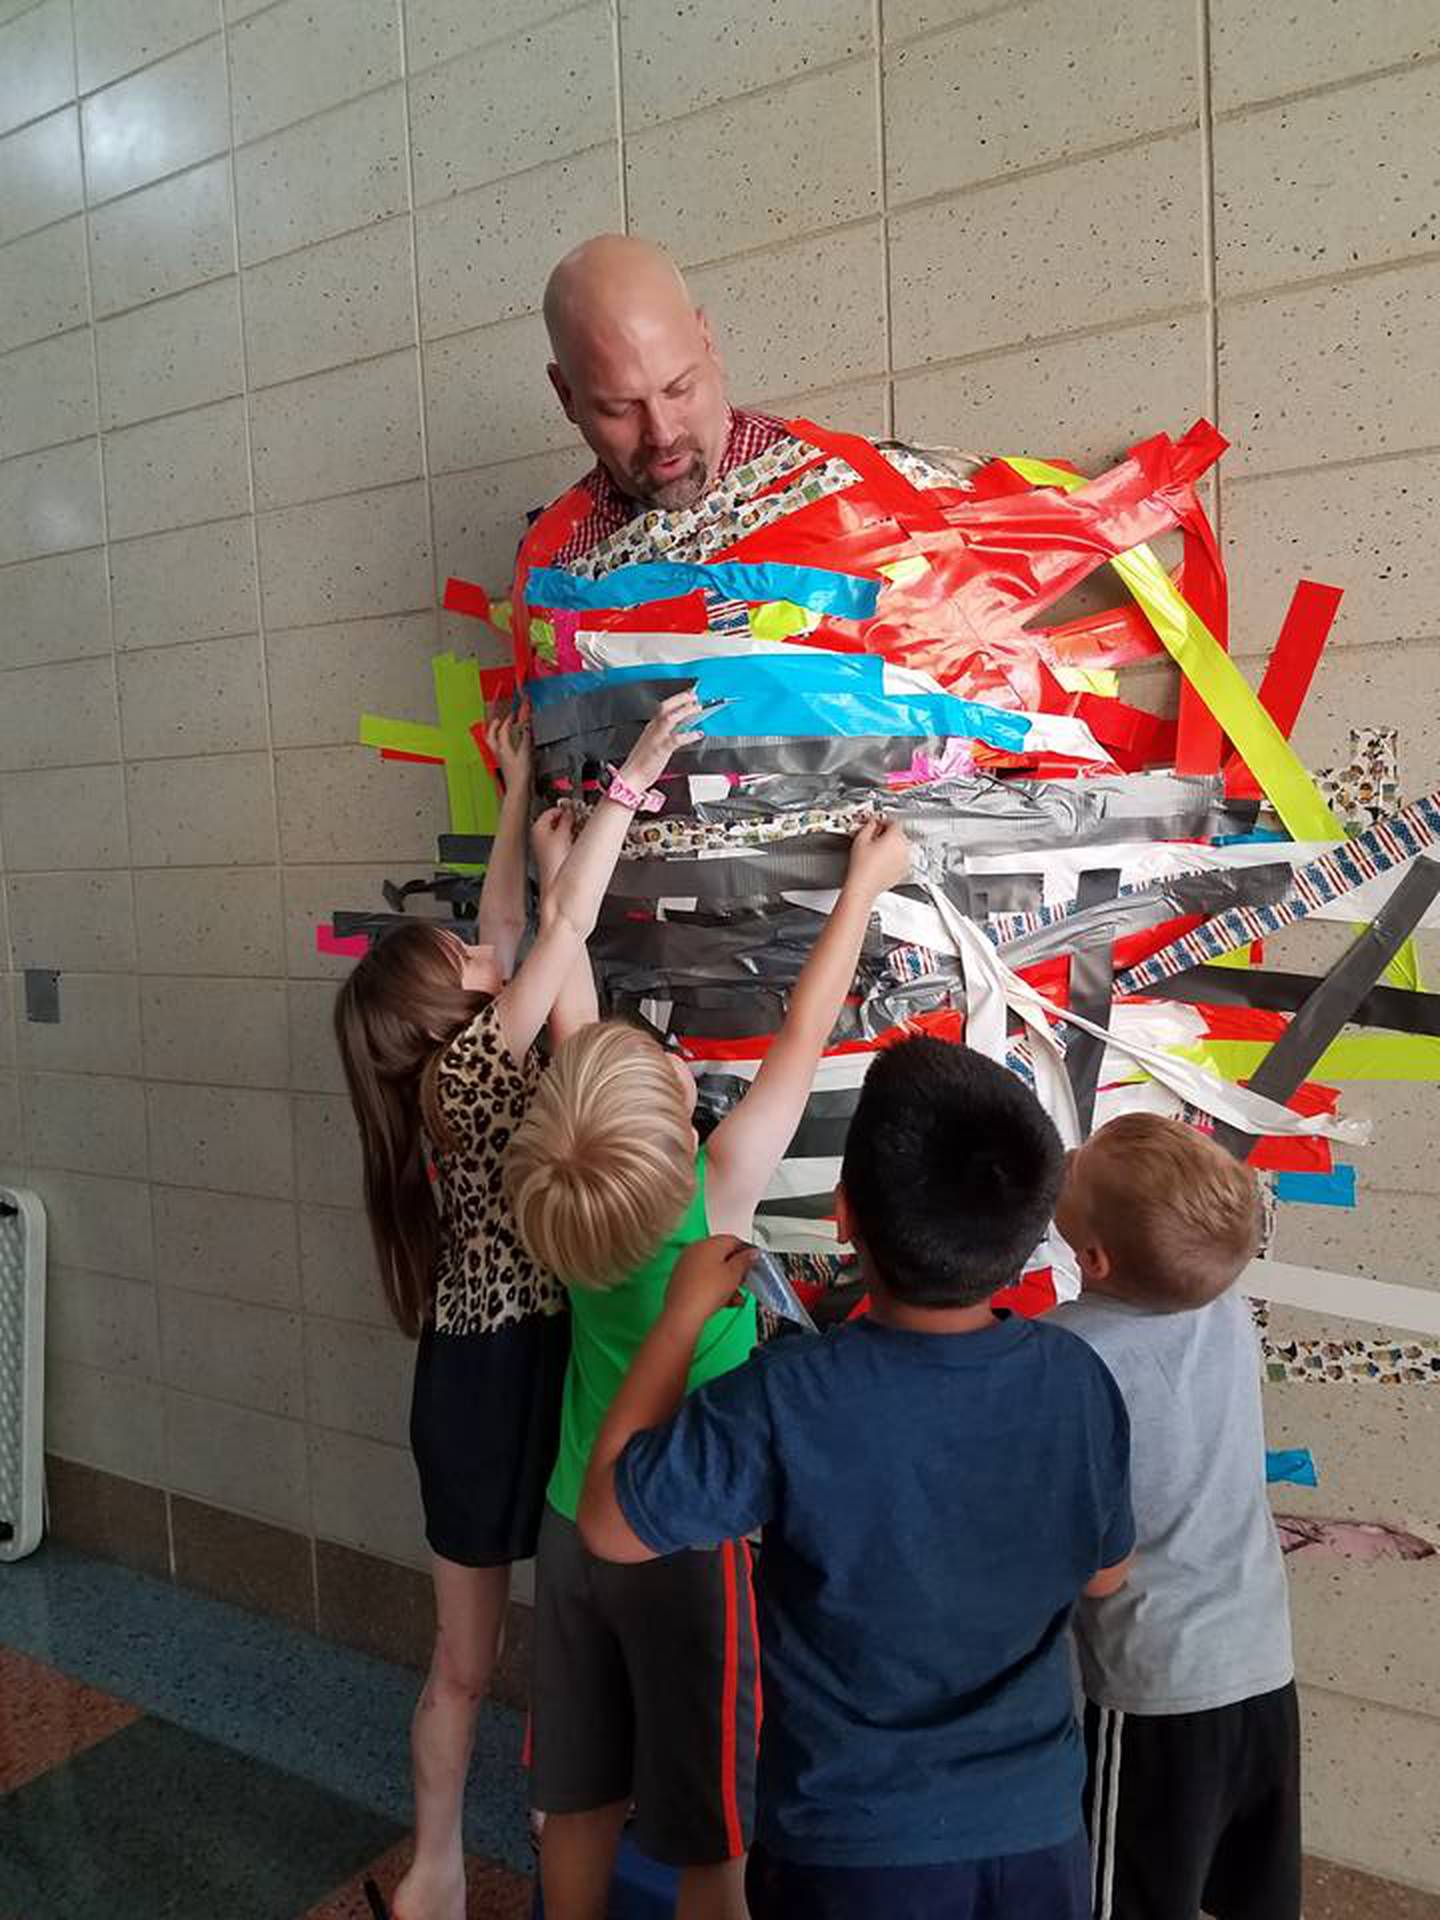 Principal Dave Raffel allows his students to tape him to the wall for charity.